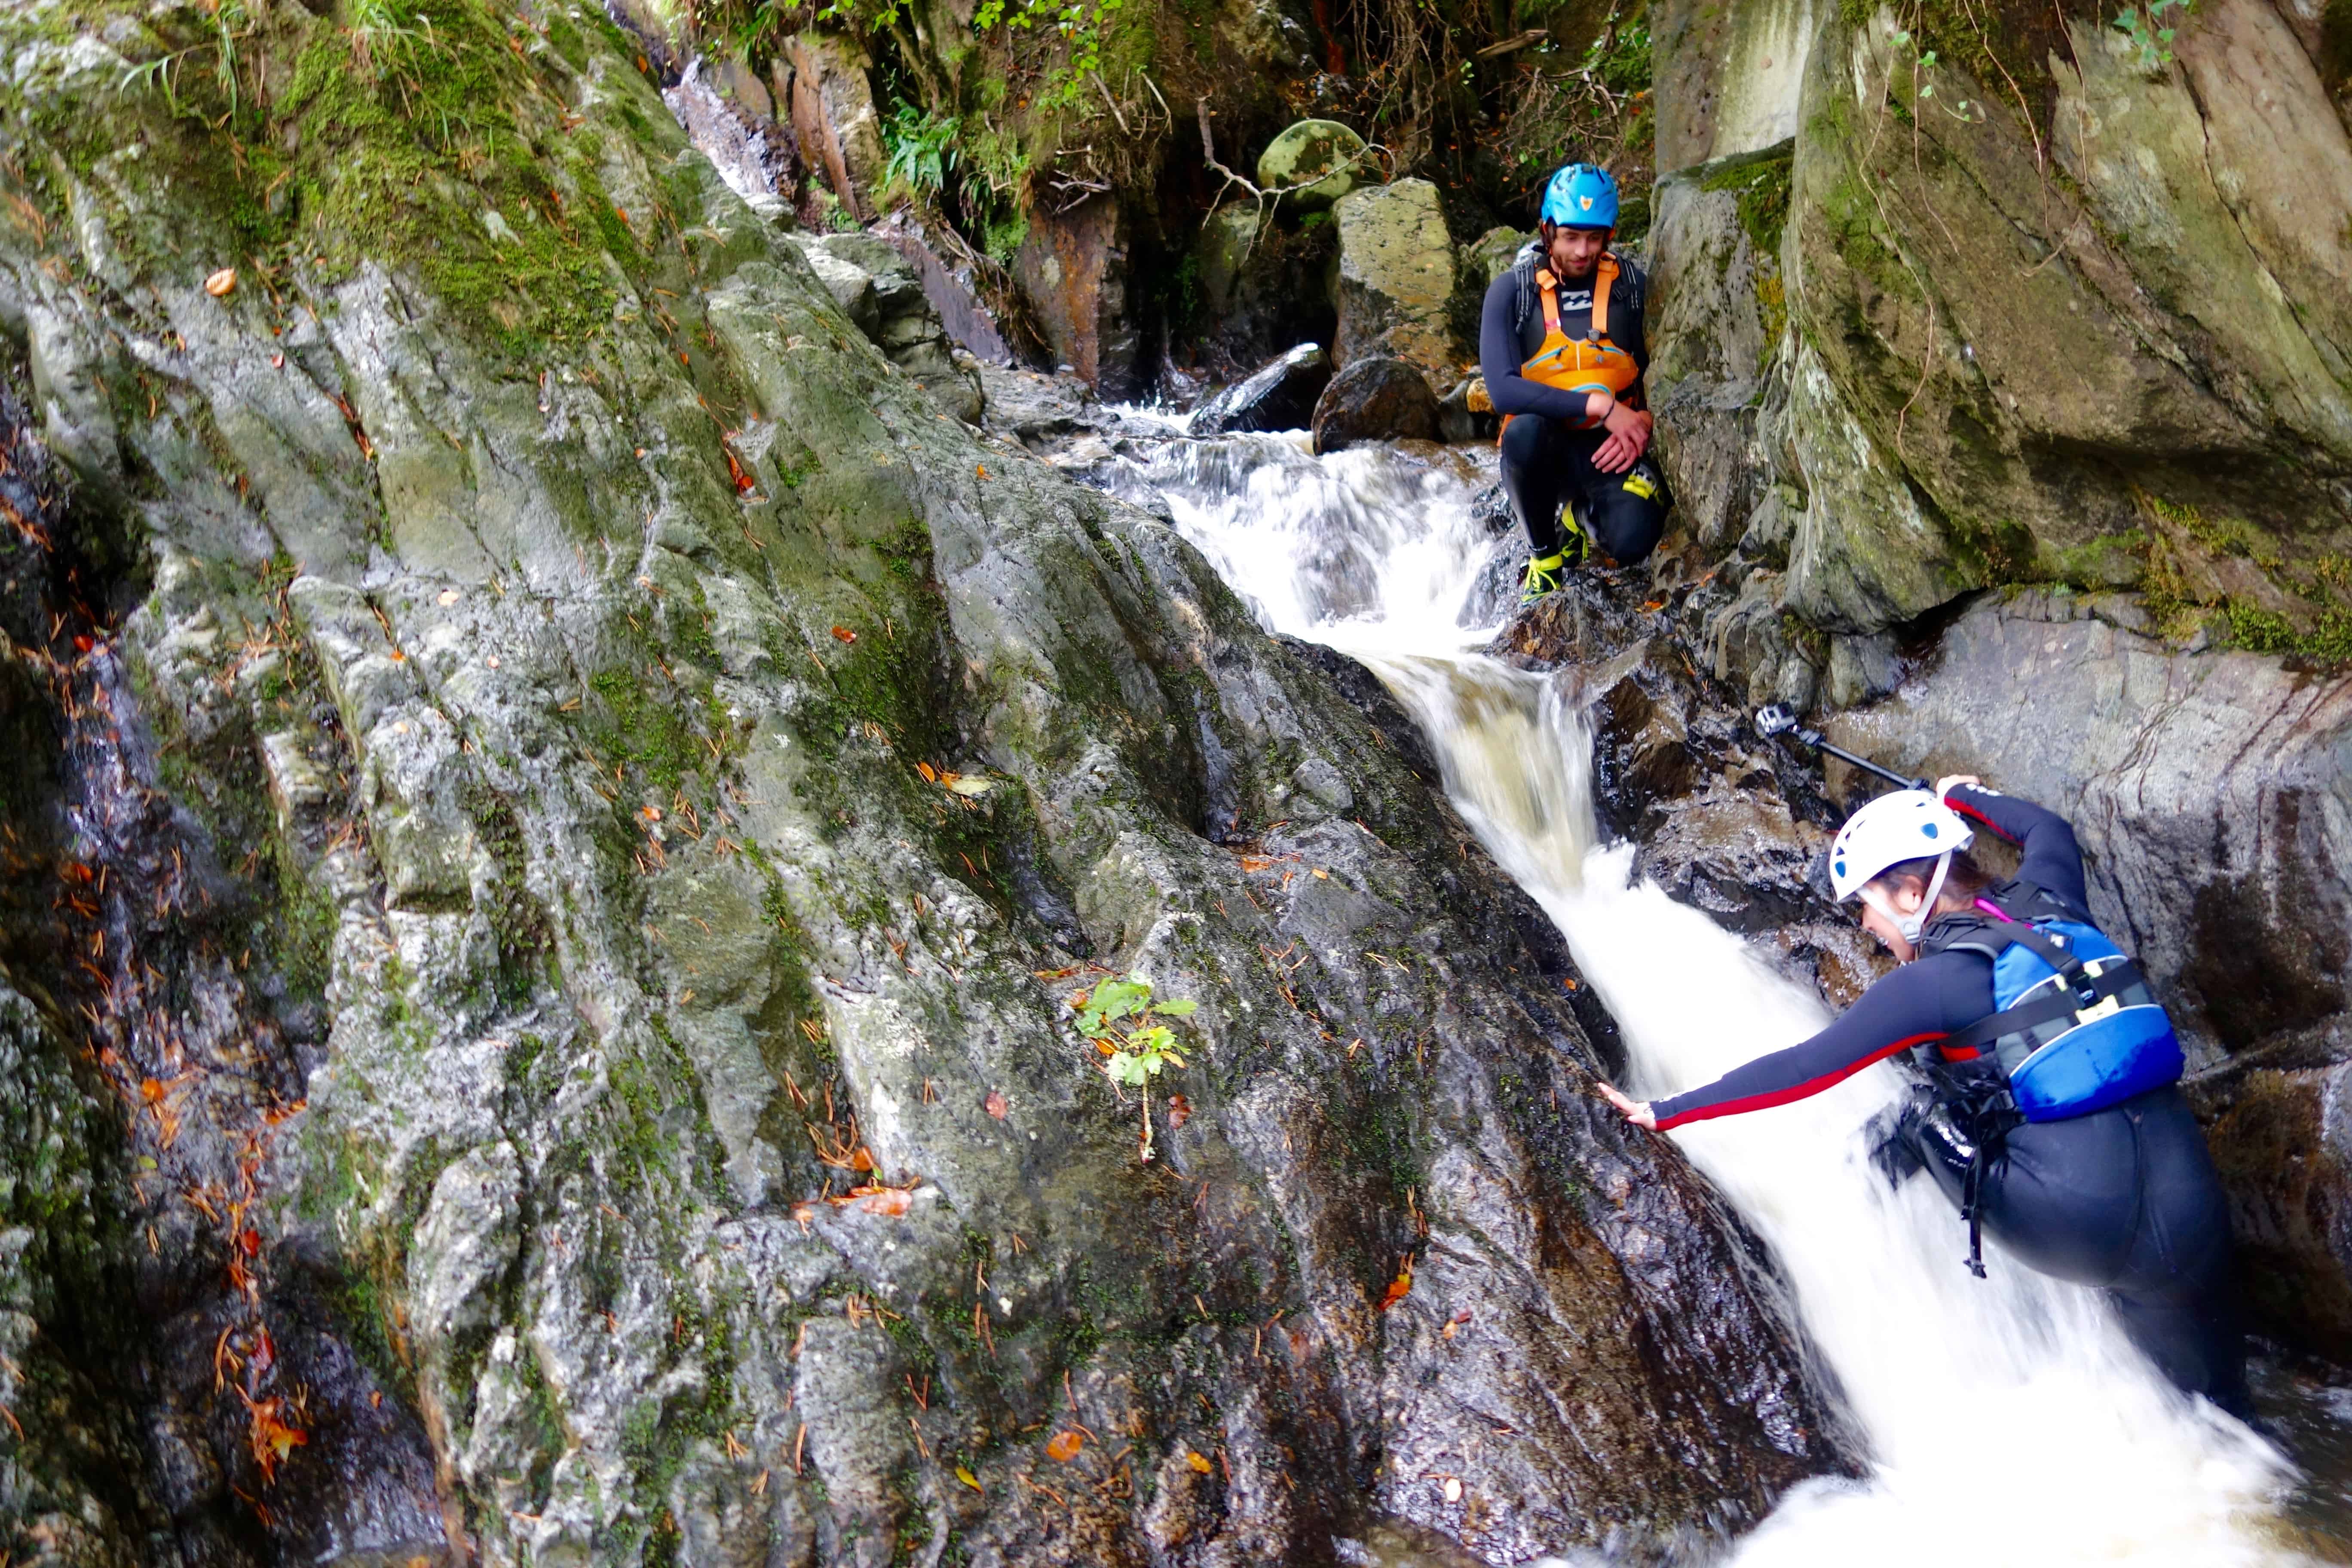 why visit wales, north wales adventure sports, canyoning wales